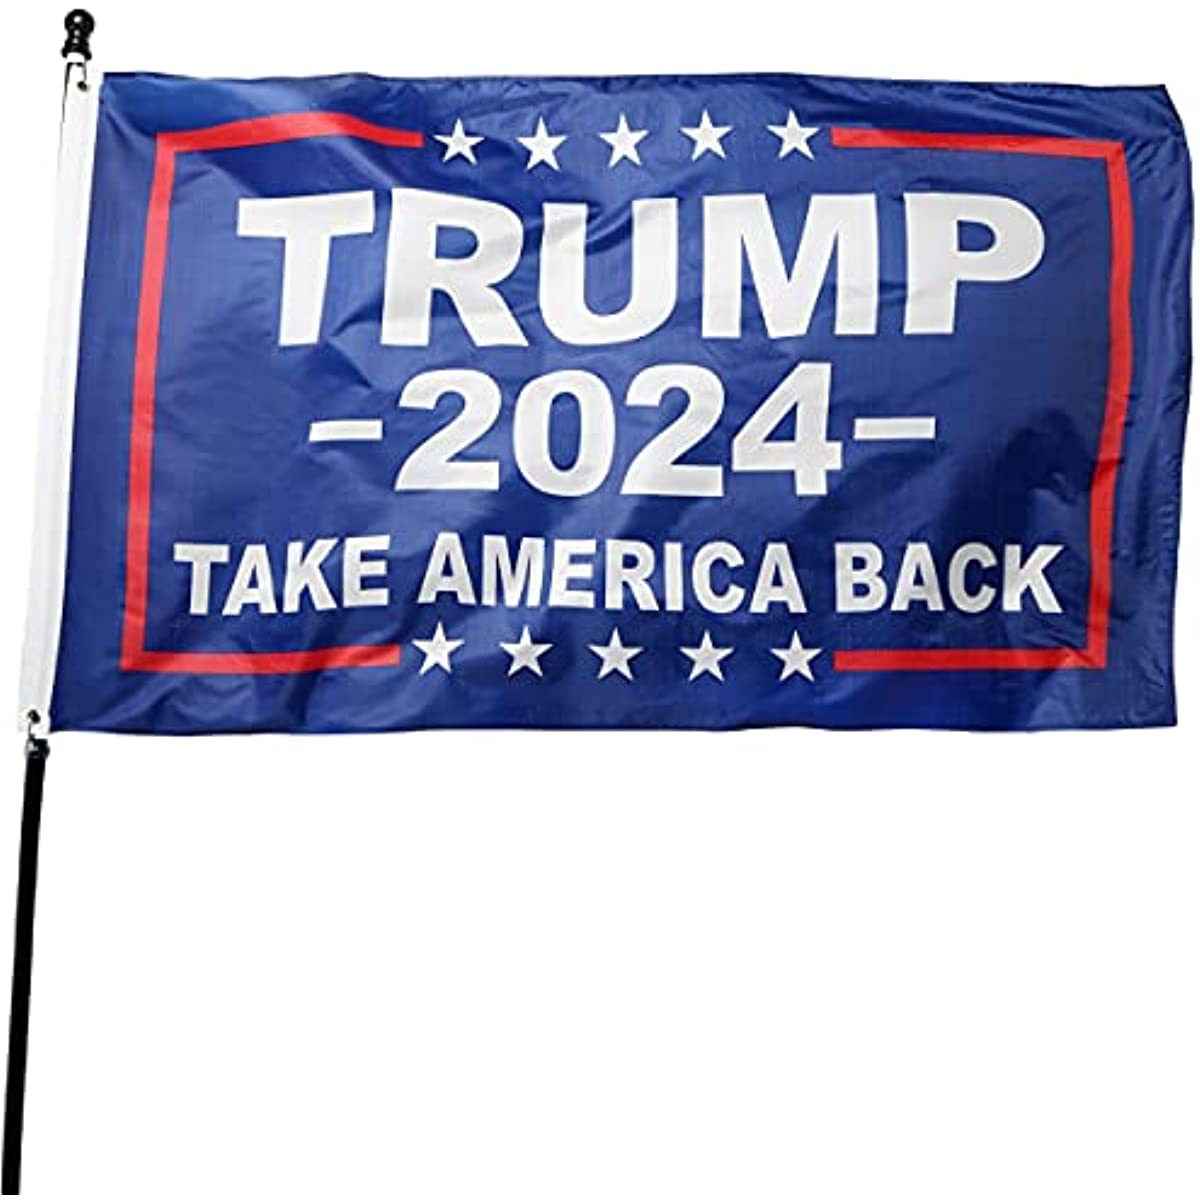 1pc politics flag 3x5ft with grommets trump 2024 take america back slogan flag presidential election flag american flag home decor room decor outdoor decor for party decor anniversary party favor activities decoration details 1